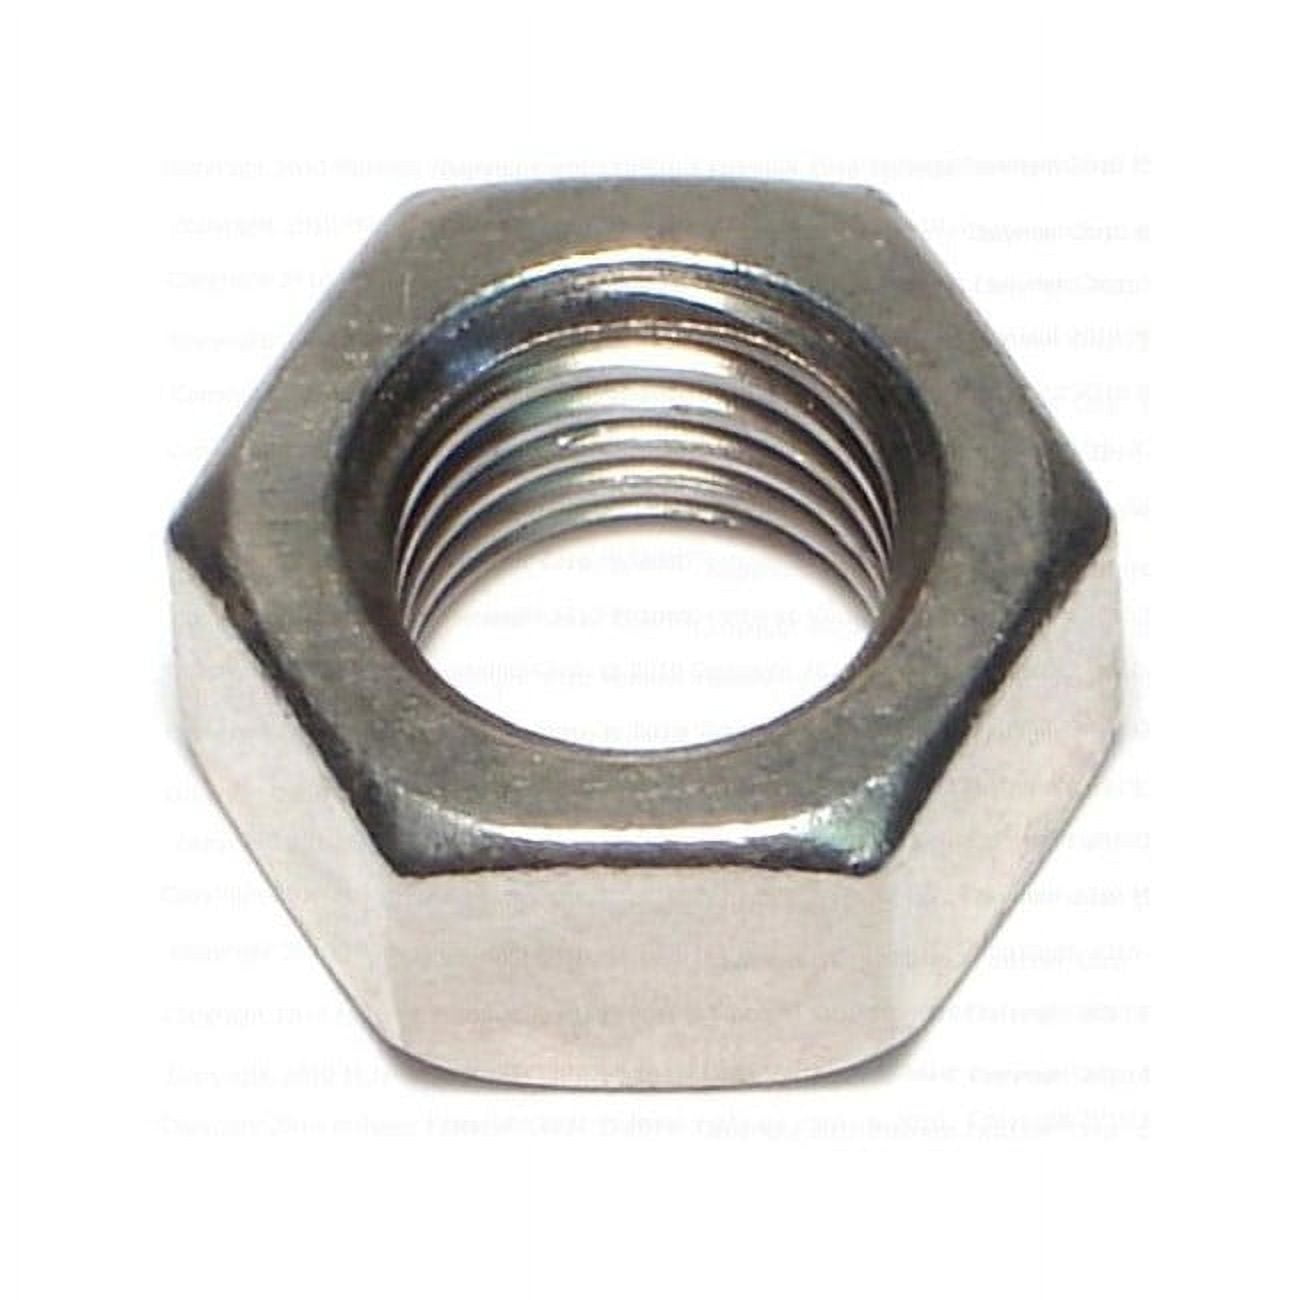 Hard-to-Find Fastener 014973242275 1-1/8-7 Coarse Finished Hex Nuts (10 Pieces)